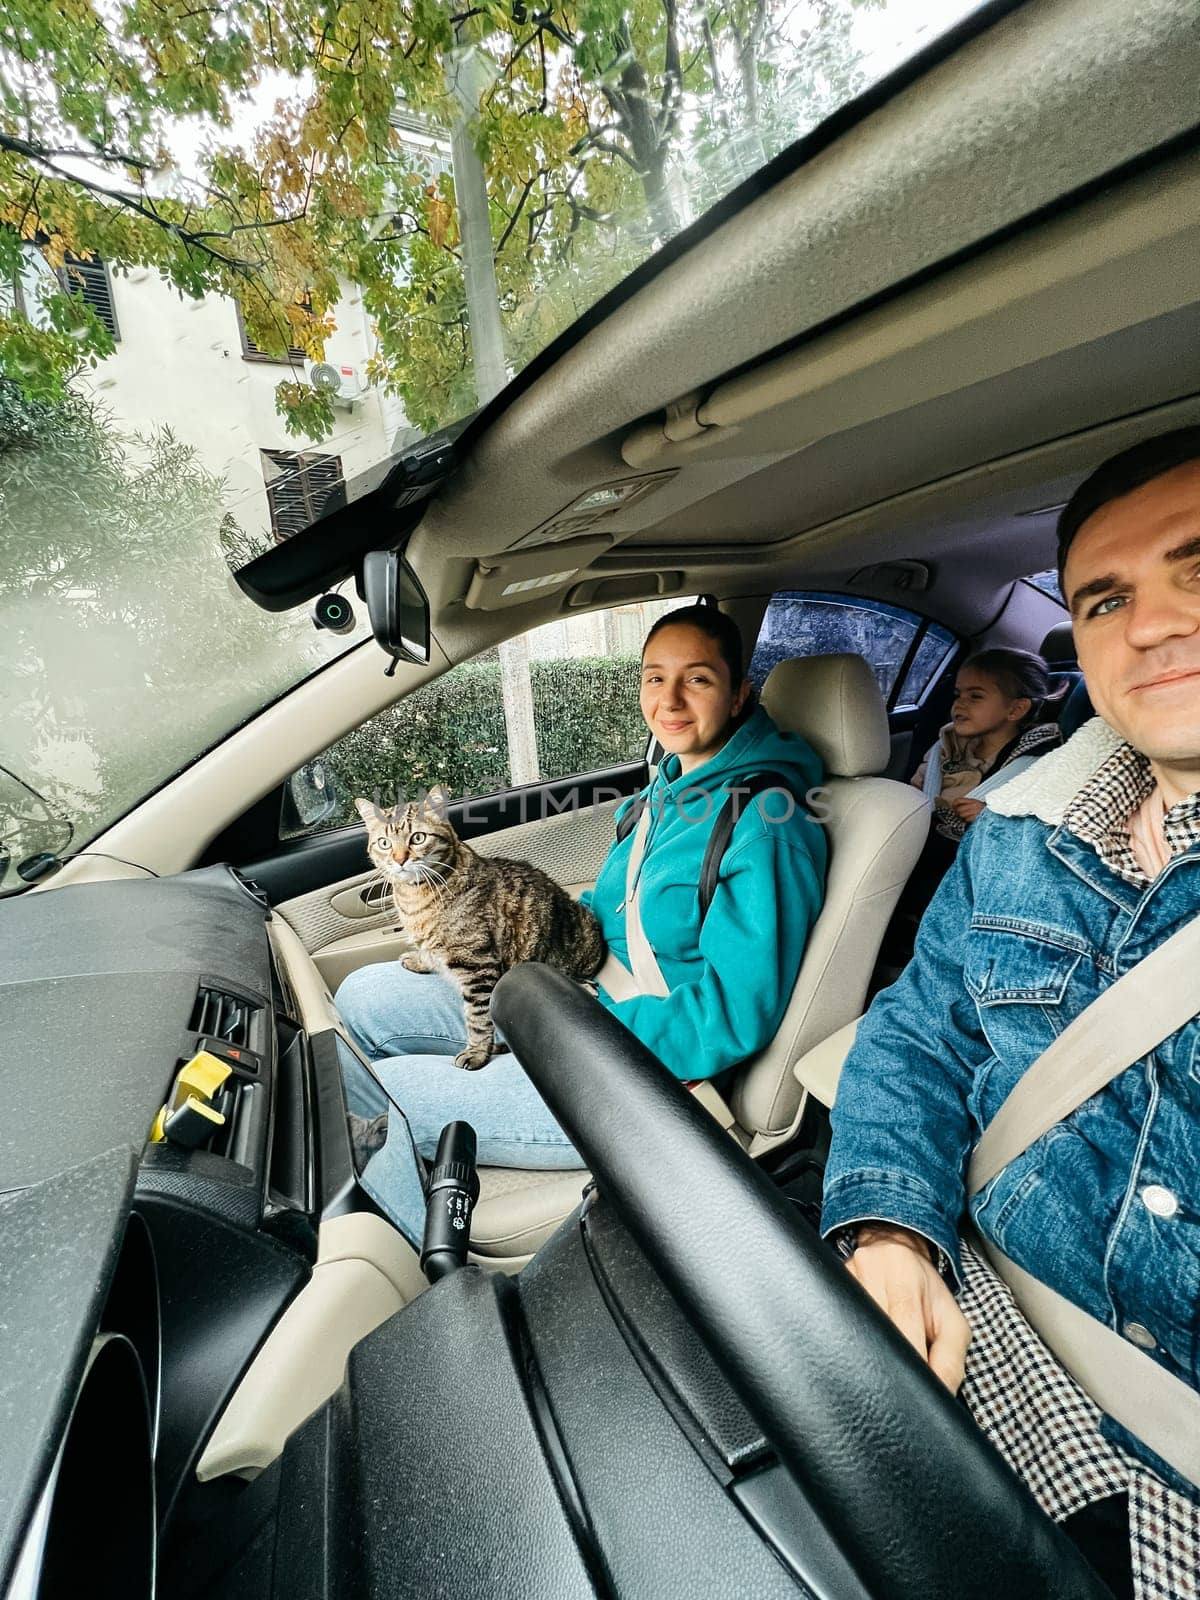 Mom, dad and a little girl are riding in a car with a cat. High quality photo